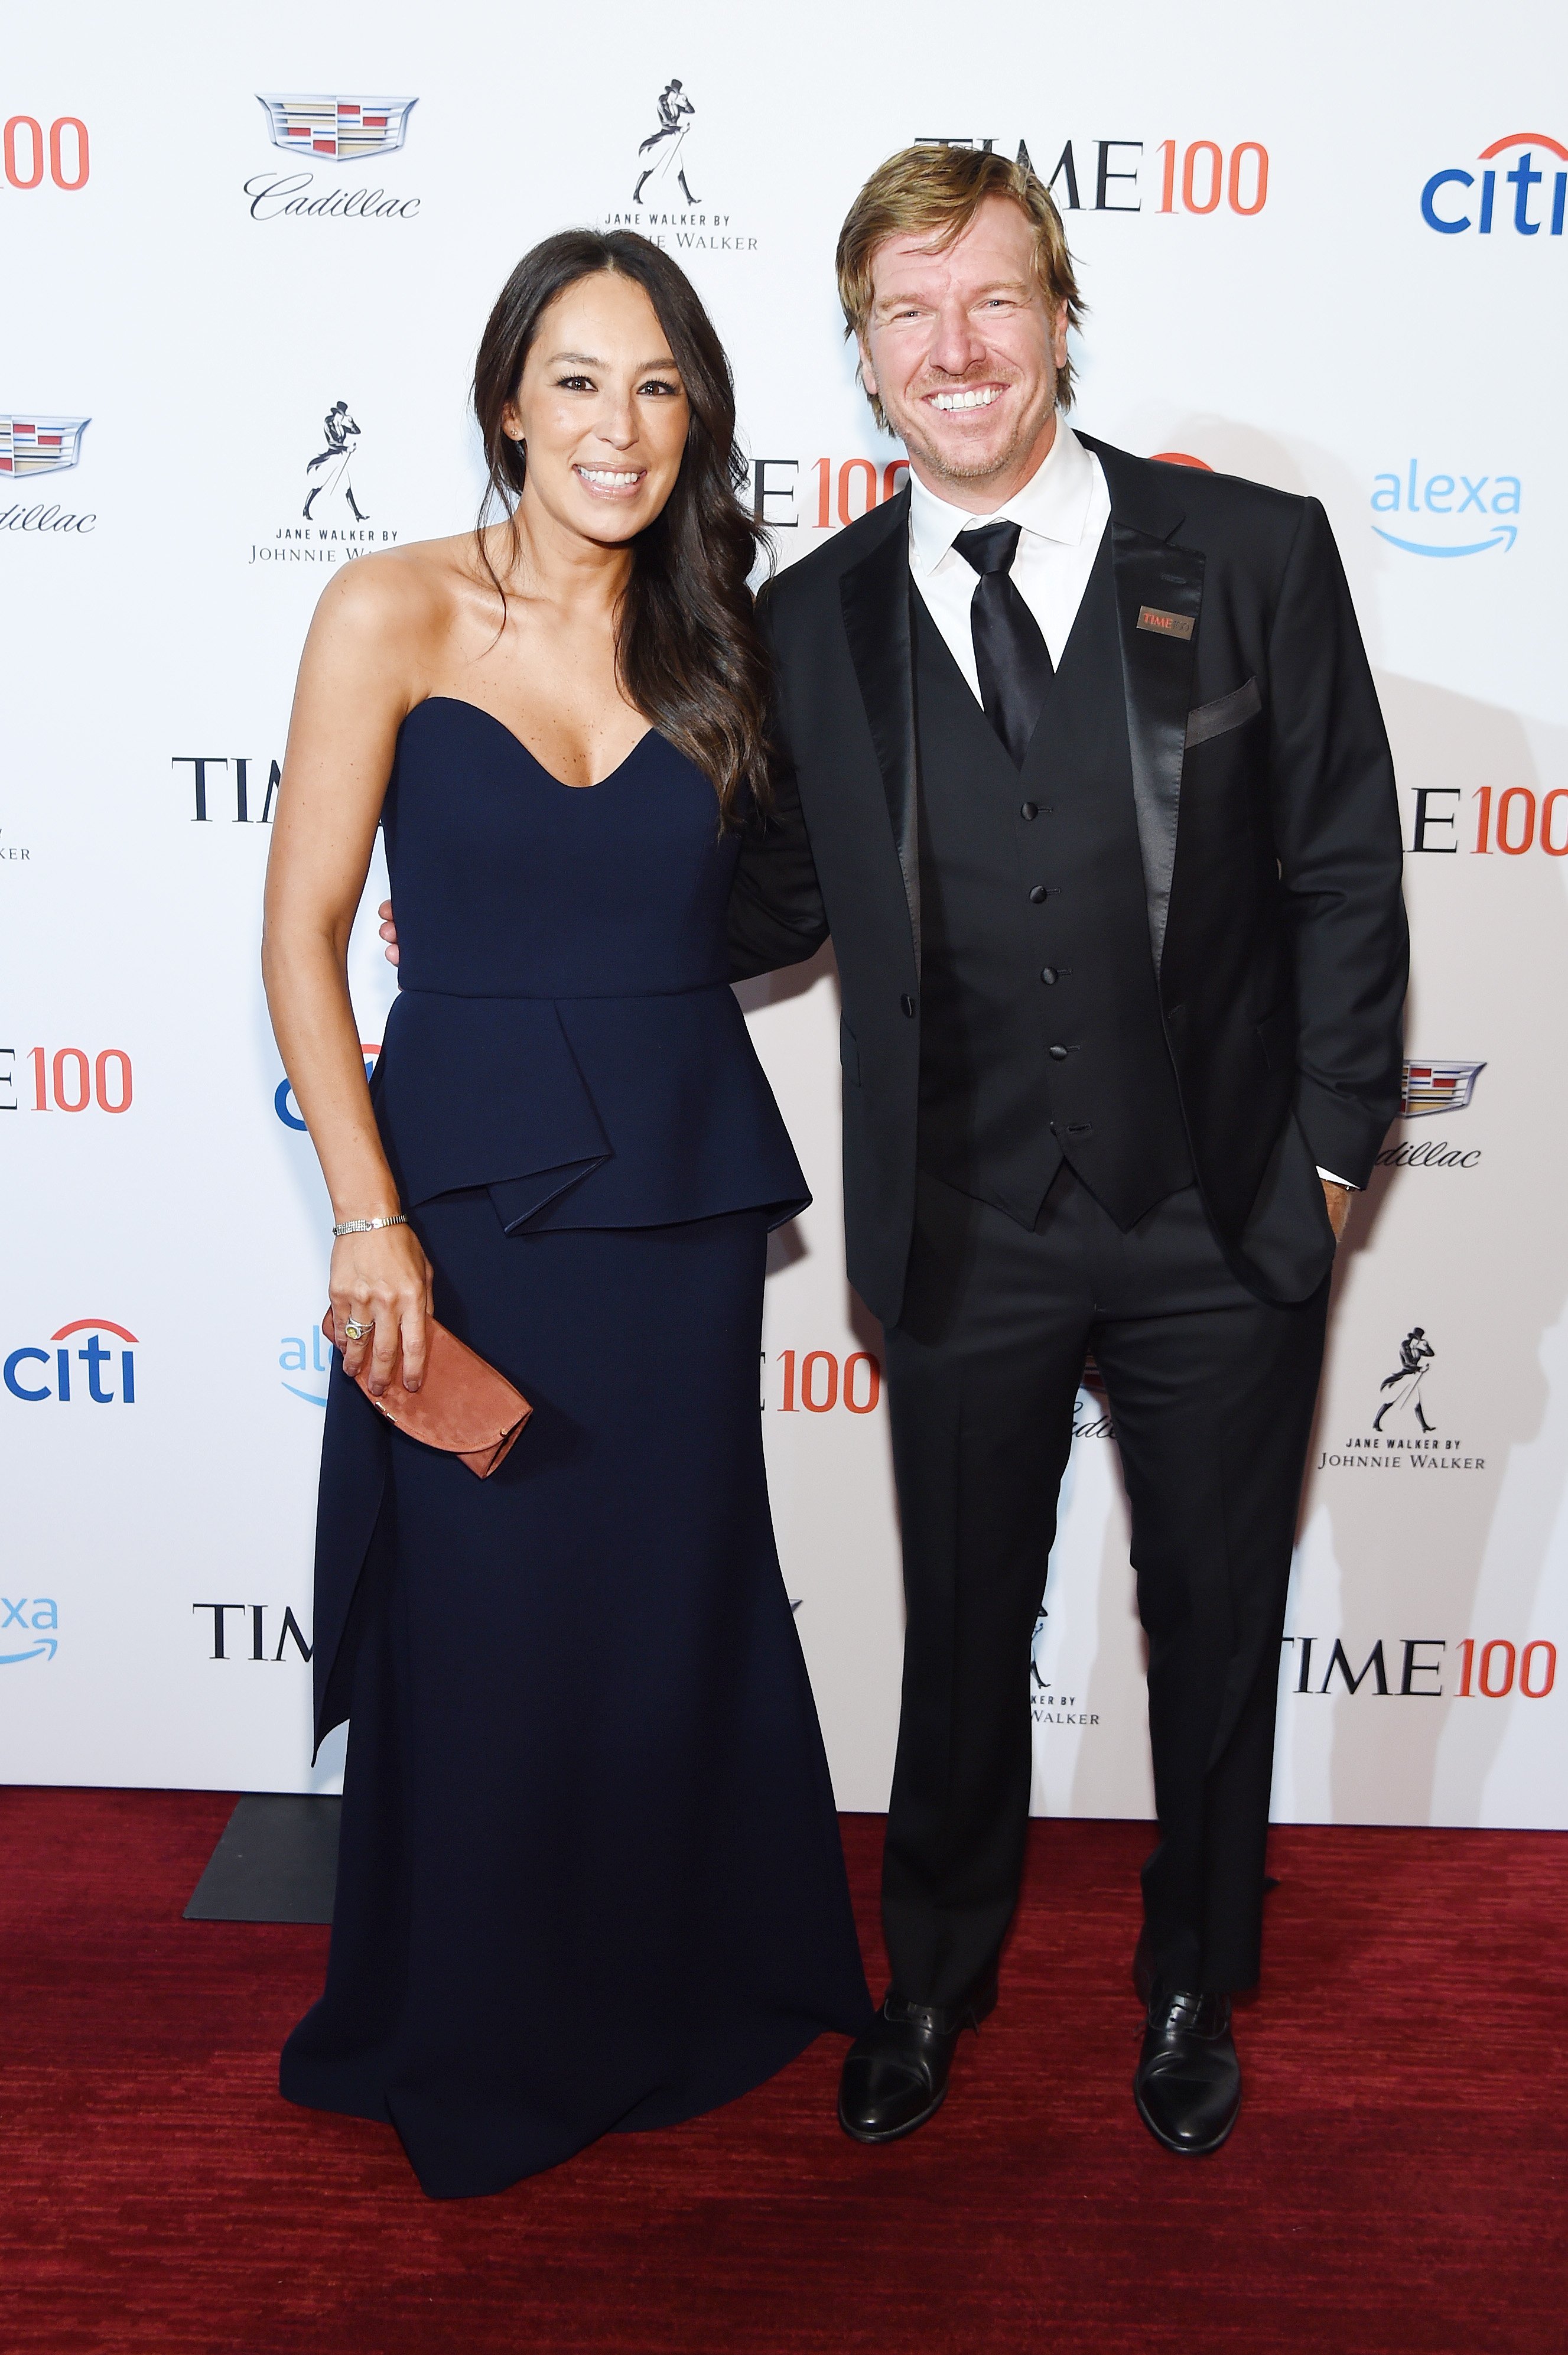 Joanna Gaines and Chip Gaines attend the TIME 100 Gala 2019 Cocktails at Jazz | Source: Getty Images